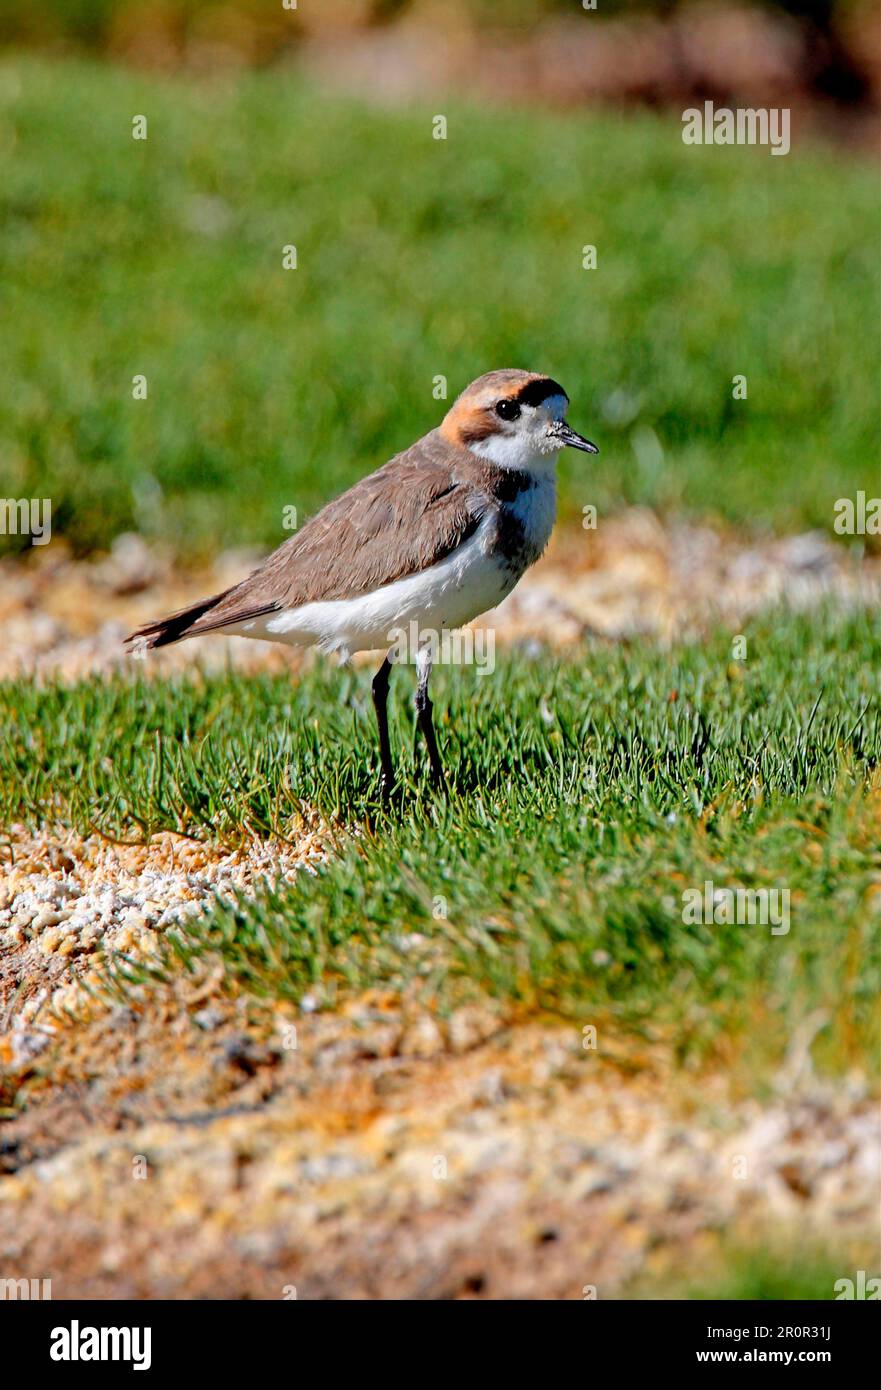 Puna Plover (Charadrius alticola) adult, standing on grassy mound in saltflats, Jujuy, Argentina Stock Photo